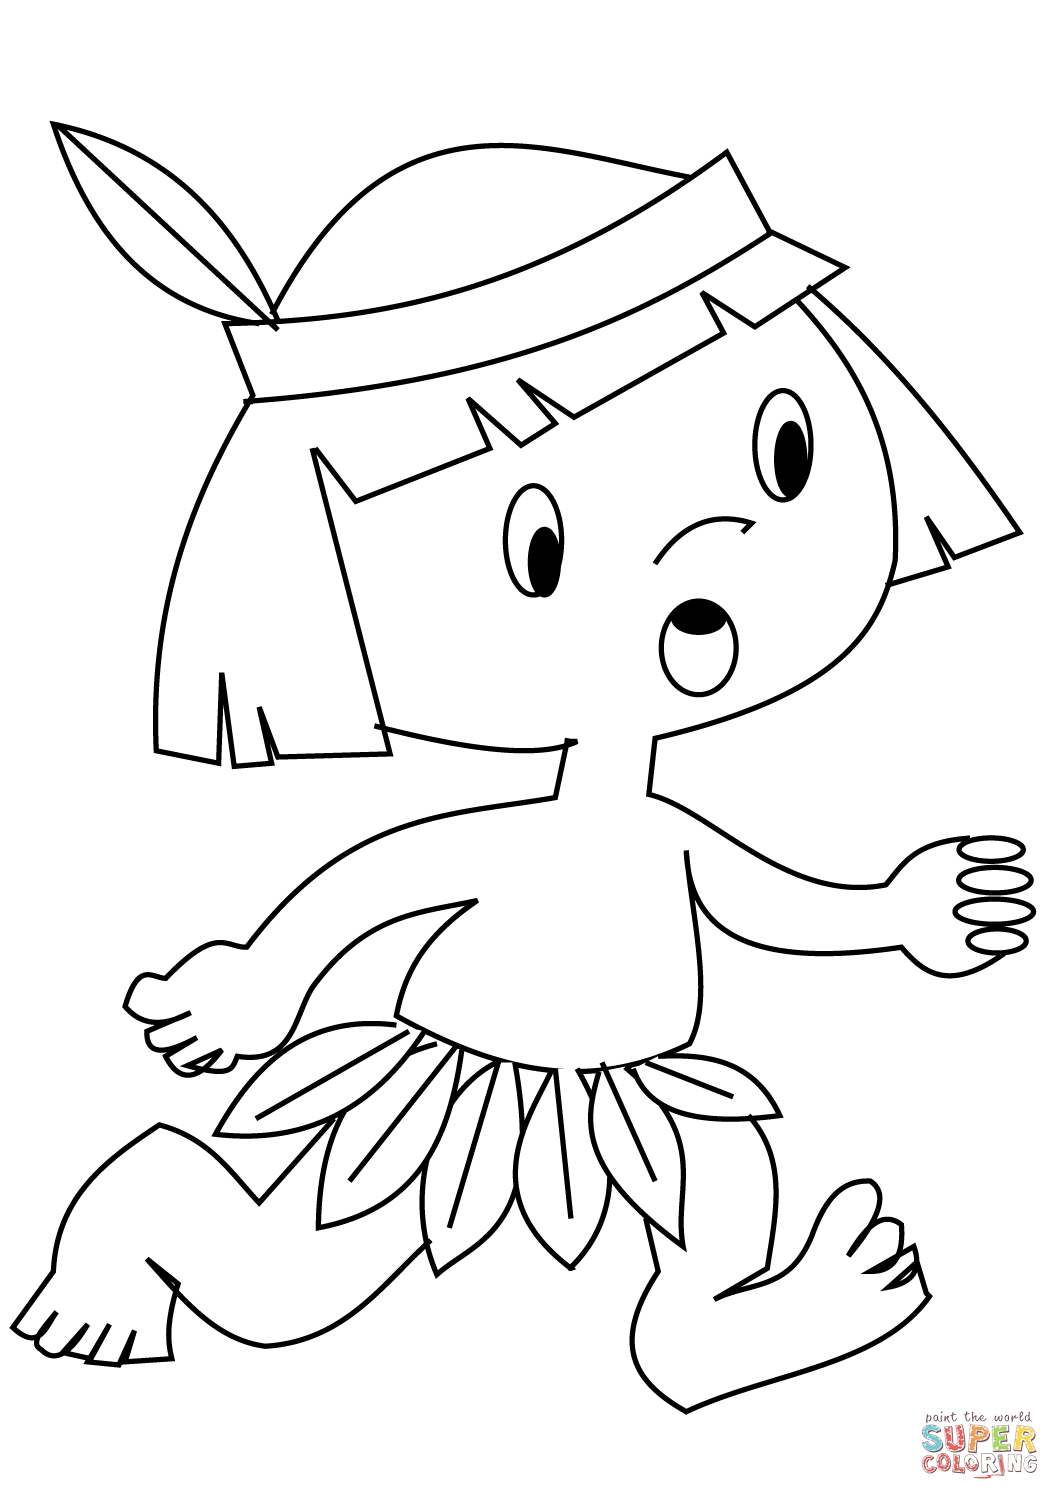 Indian Boy coloring page | Free Printable Coloring Pages